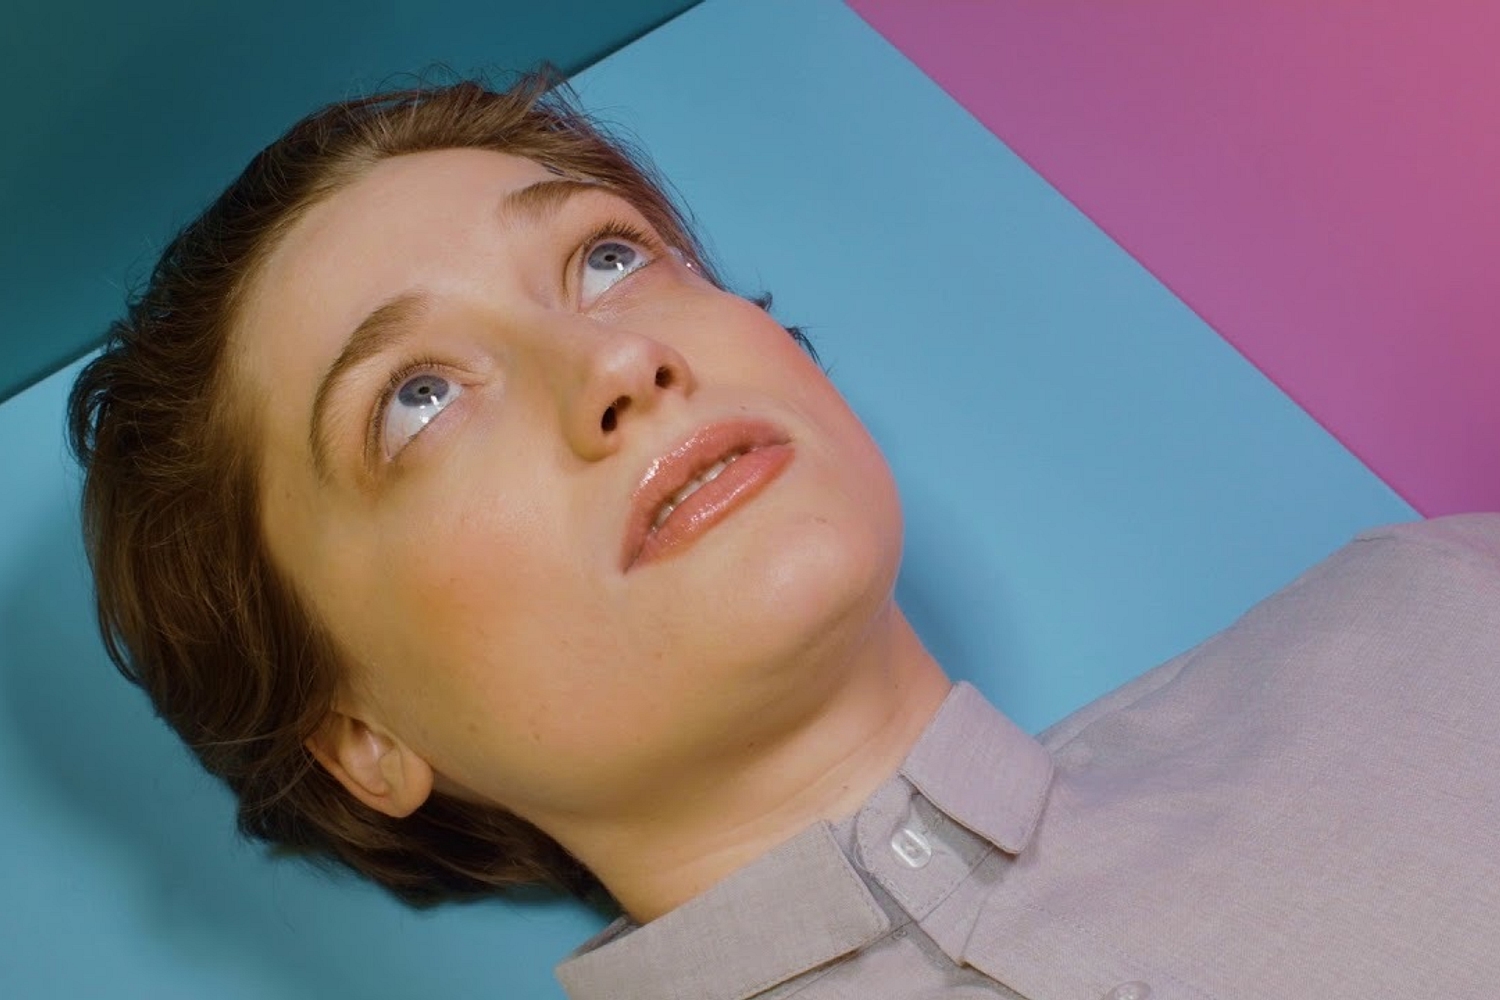 Petal takes on Whac-A-Mole in her new ‘Better Than You’ video